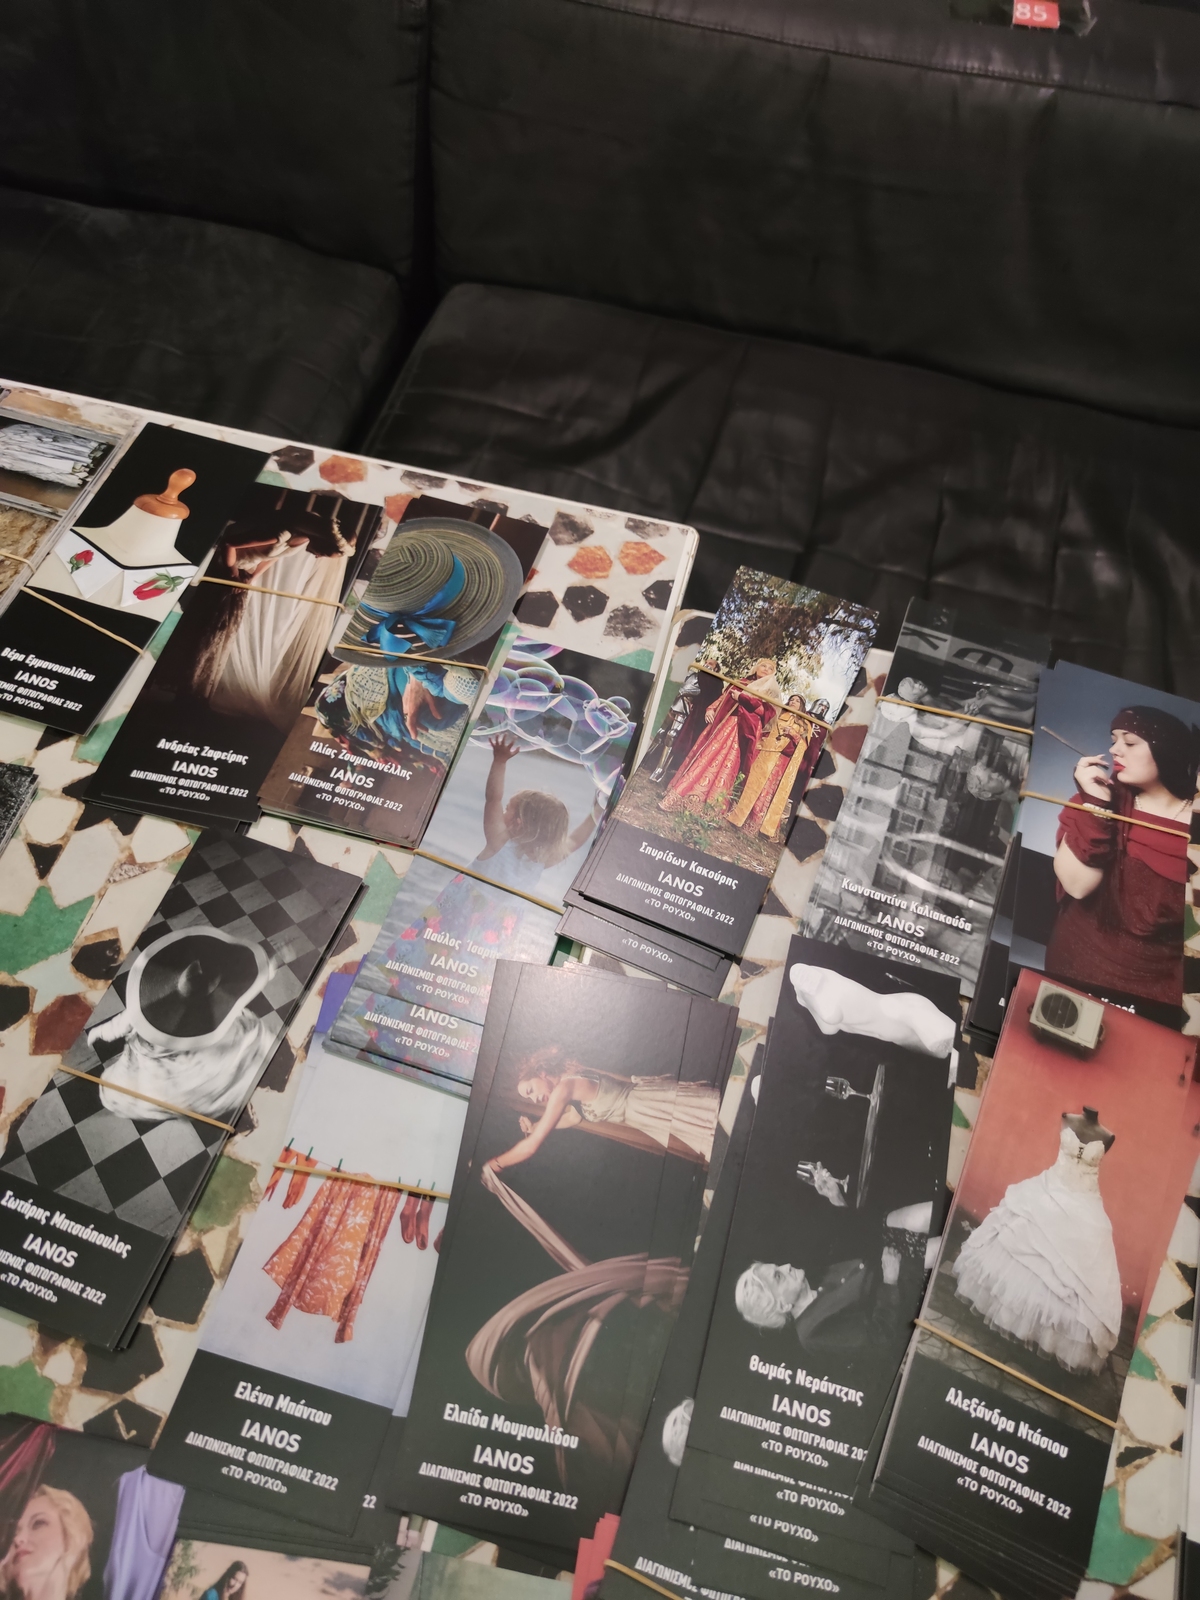 A photo of mine was distinguished and exhibited in IANOS at the 'Clothes' contest (10/2022): The bookmarks